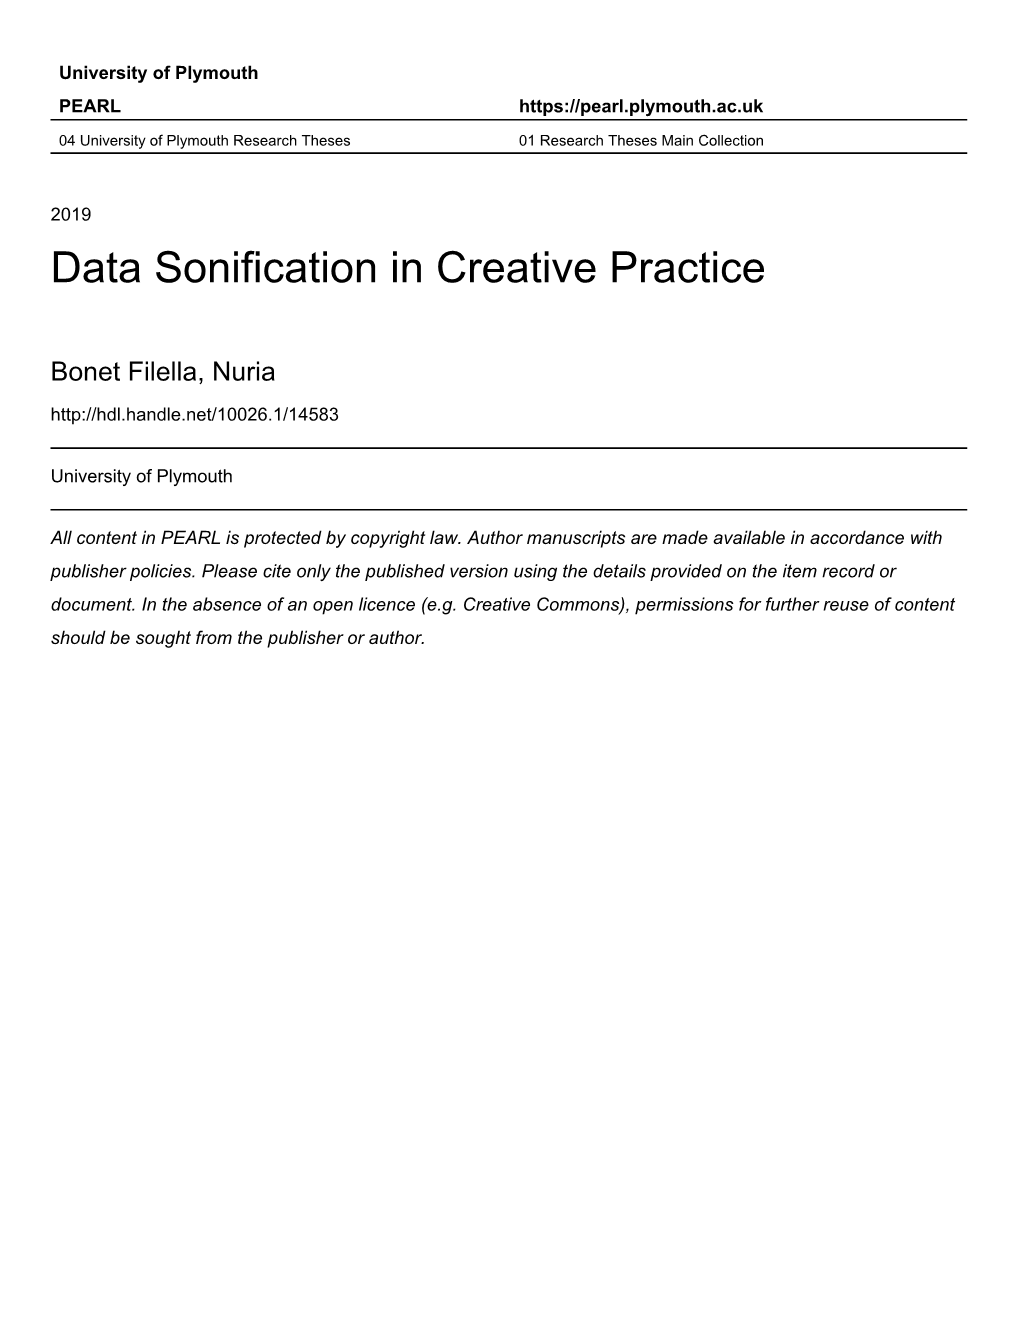 Data Sonification in Creative Practice